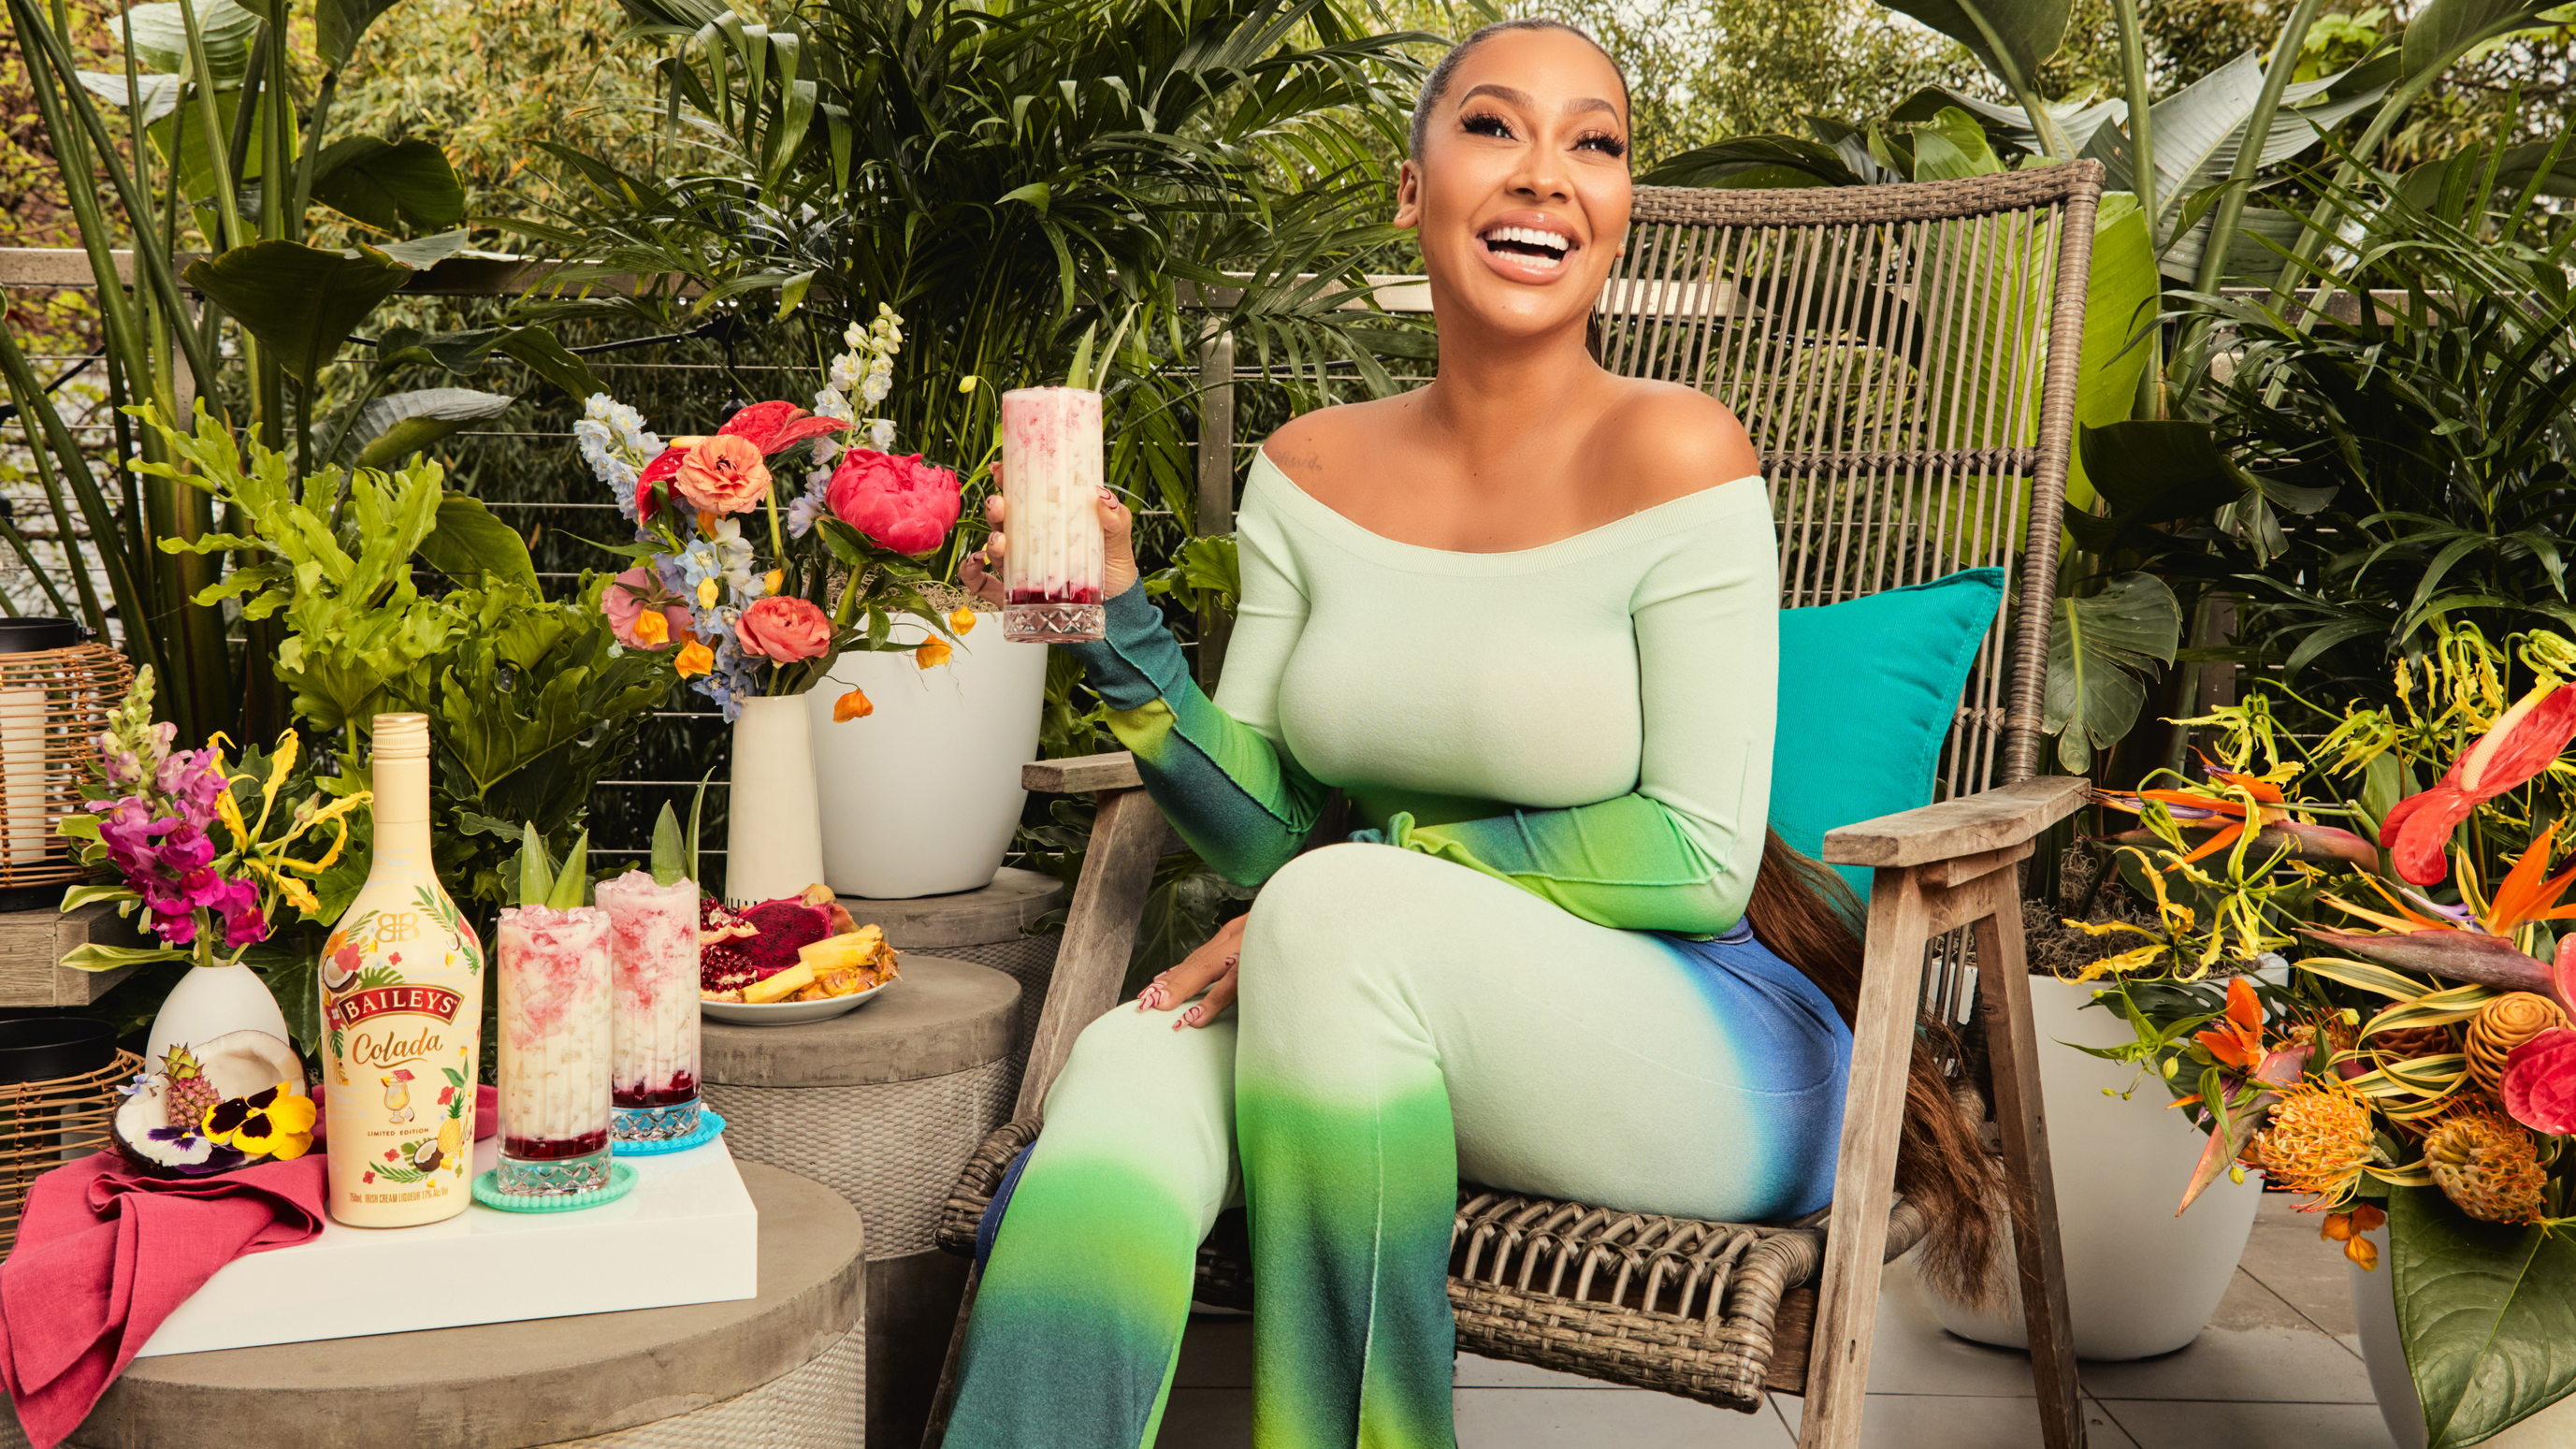 La La Anthony Partnered With This Liqueur Brand To Celebrate Her Puerto Rican Roots